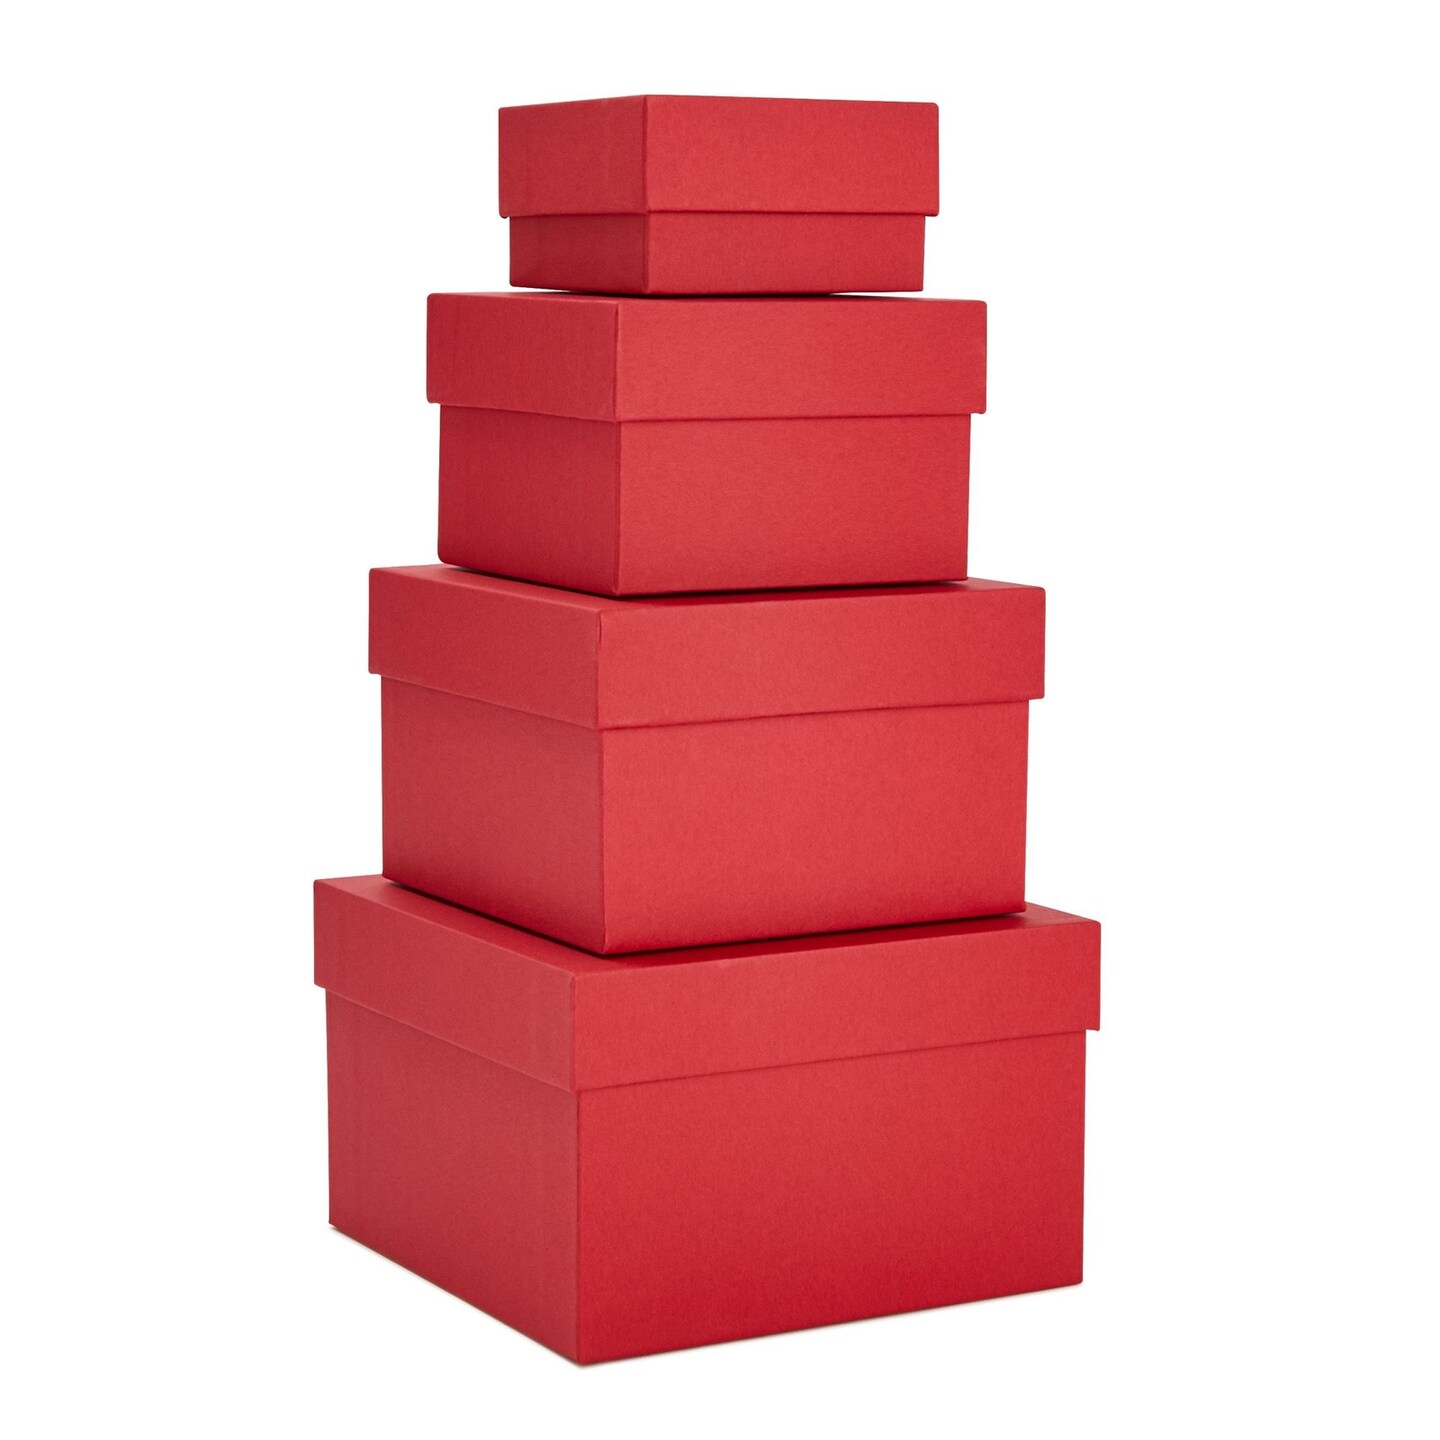 Legacy Decorative Nesting Gift Boxes Set of Four Boxes With Lids for  Stacking Storage Organization Display 7 6 5 4 Square 